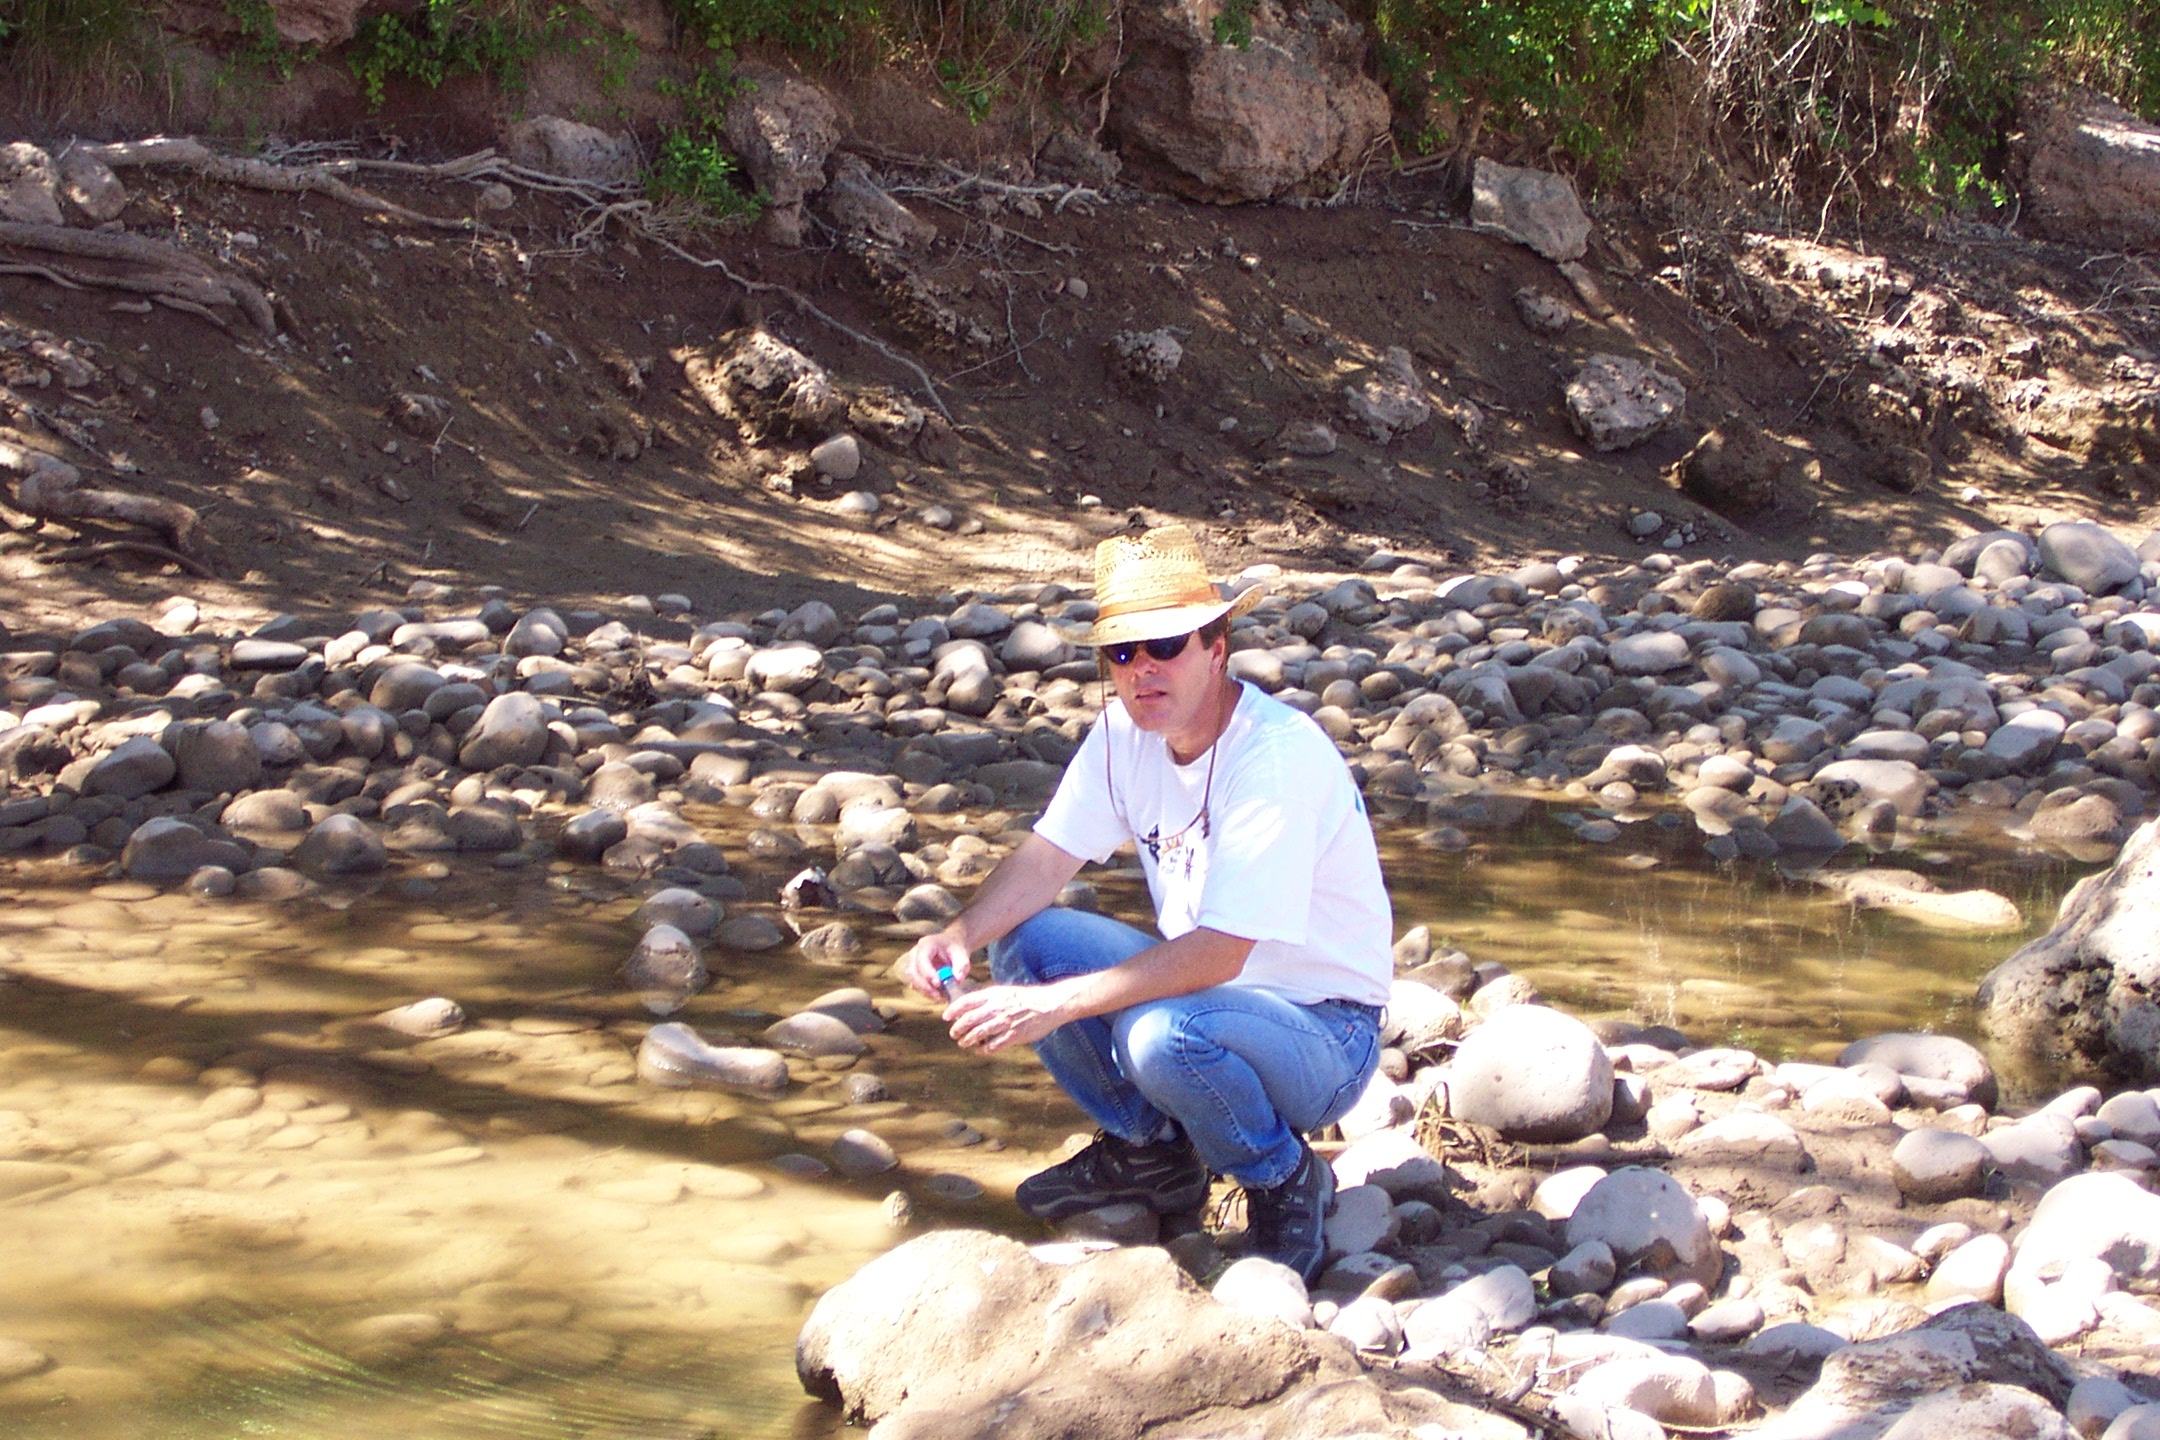 Collecting samples along the Verde River.